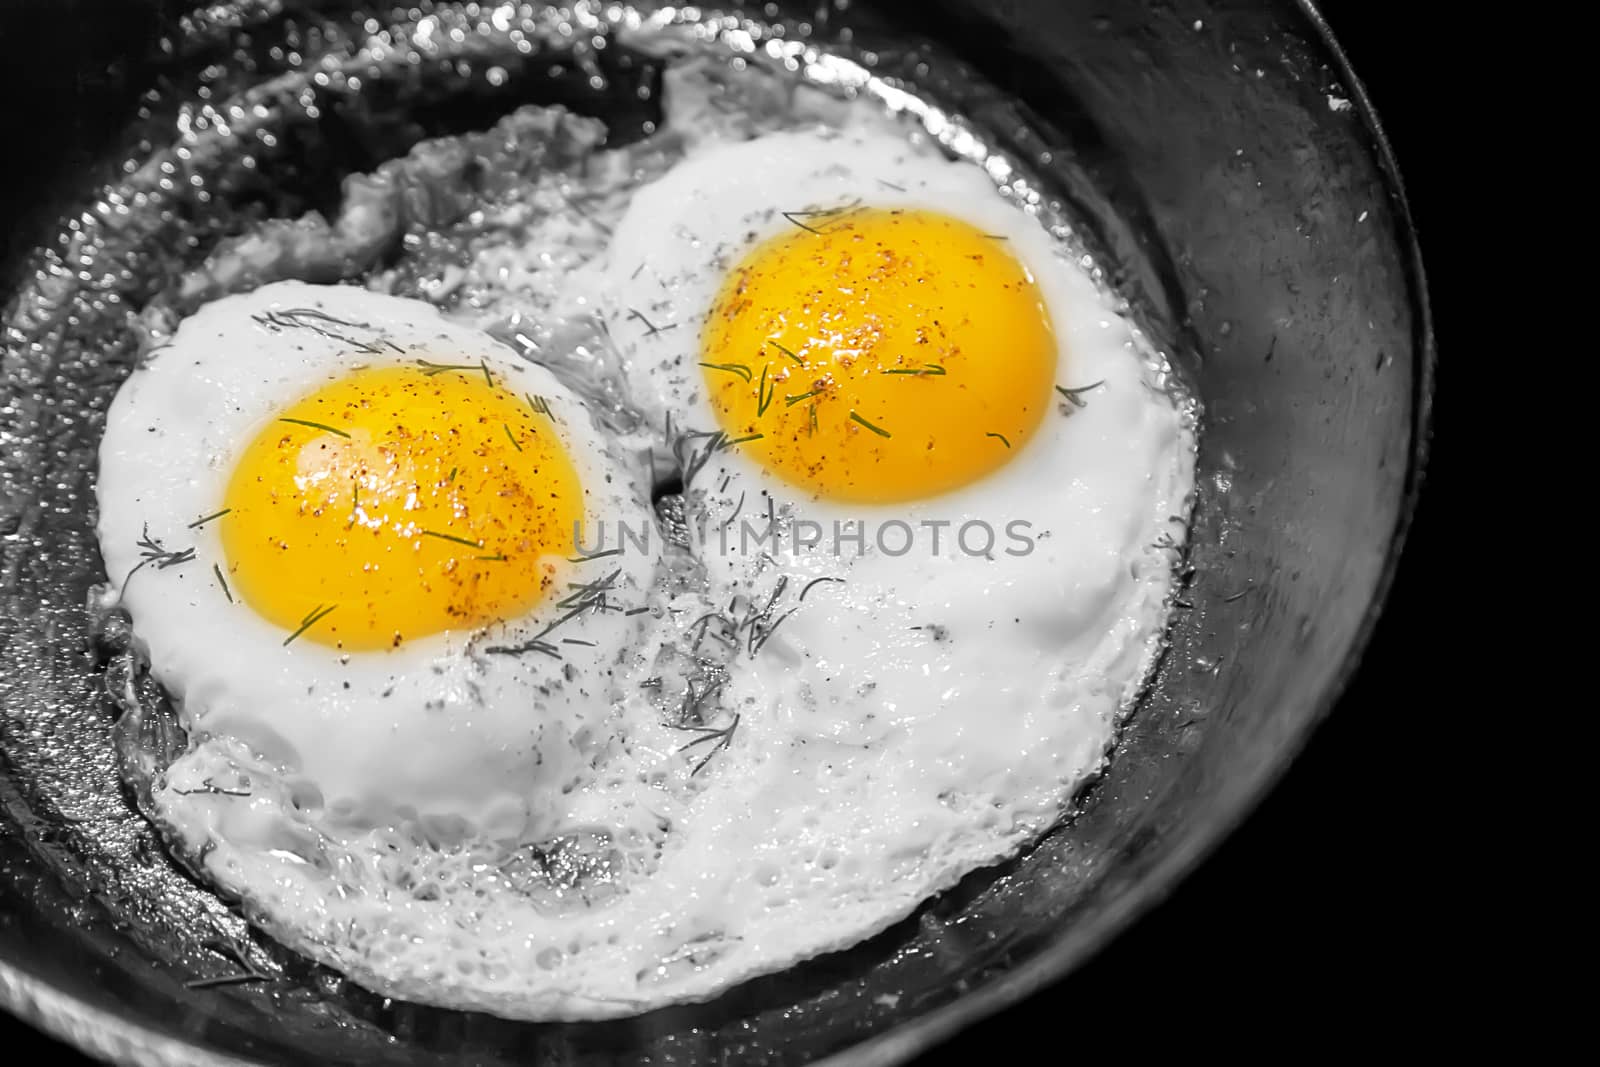 Eggs in a cast iron skillet prepared to perfection